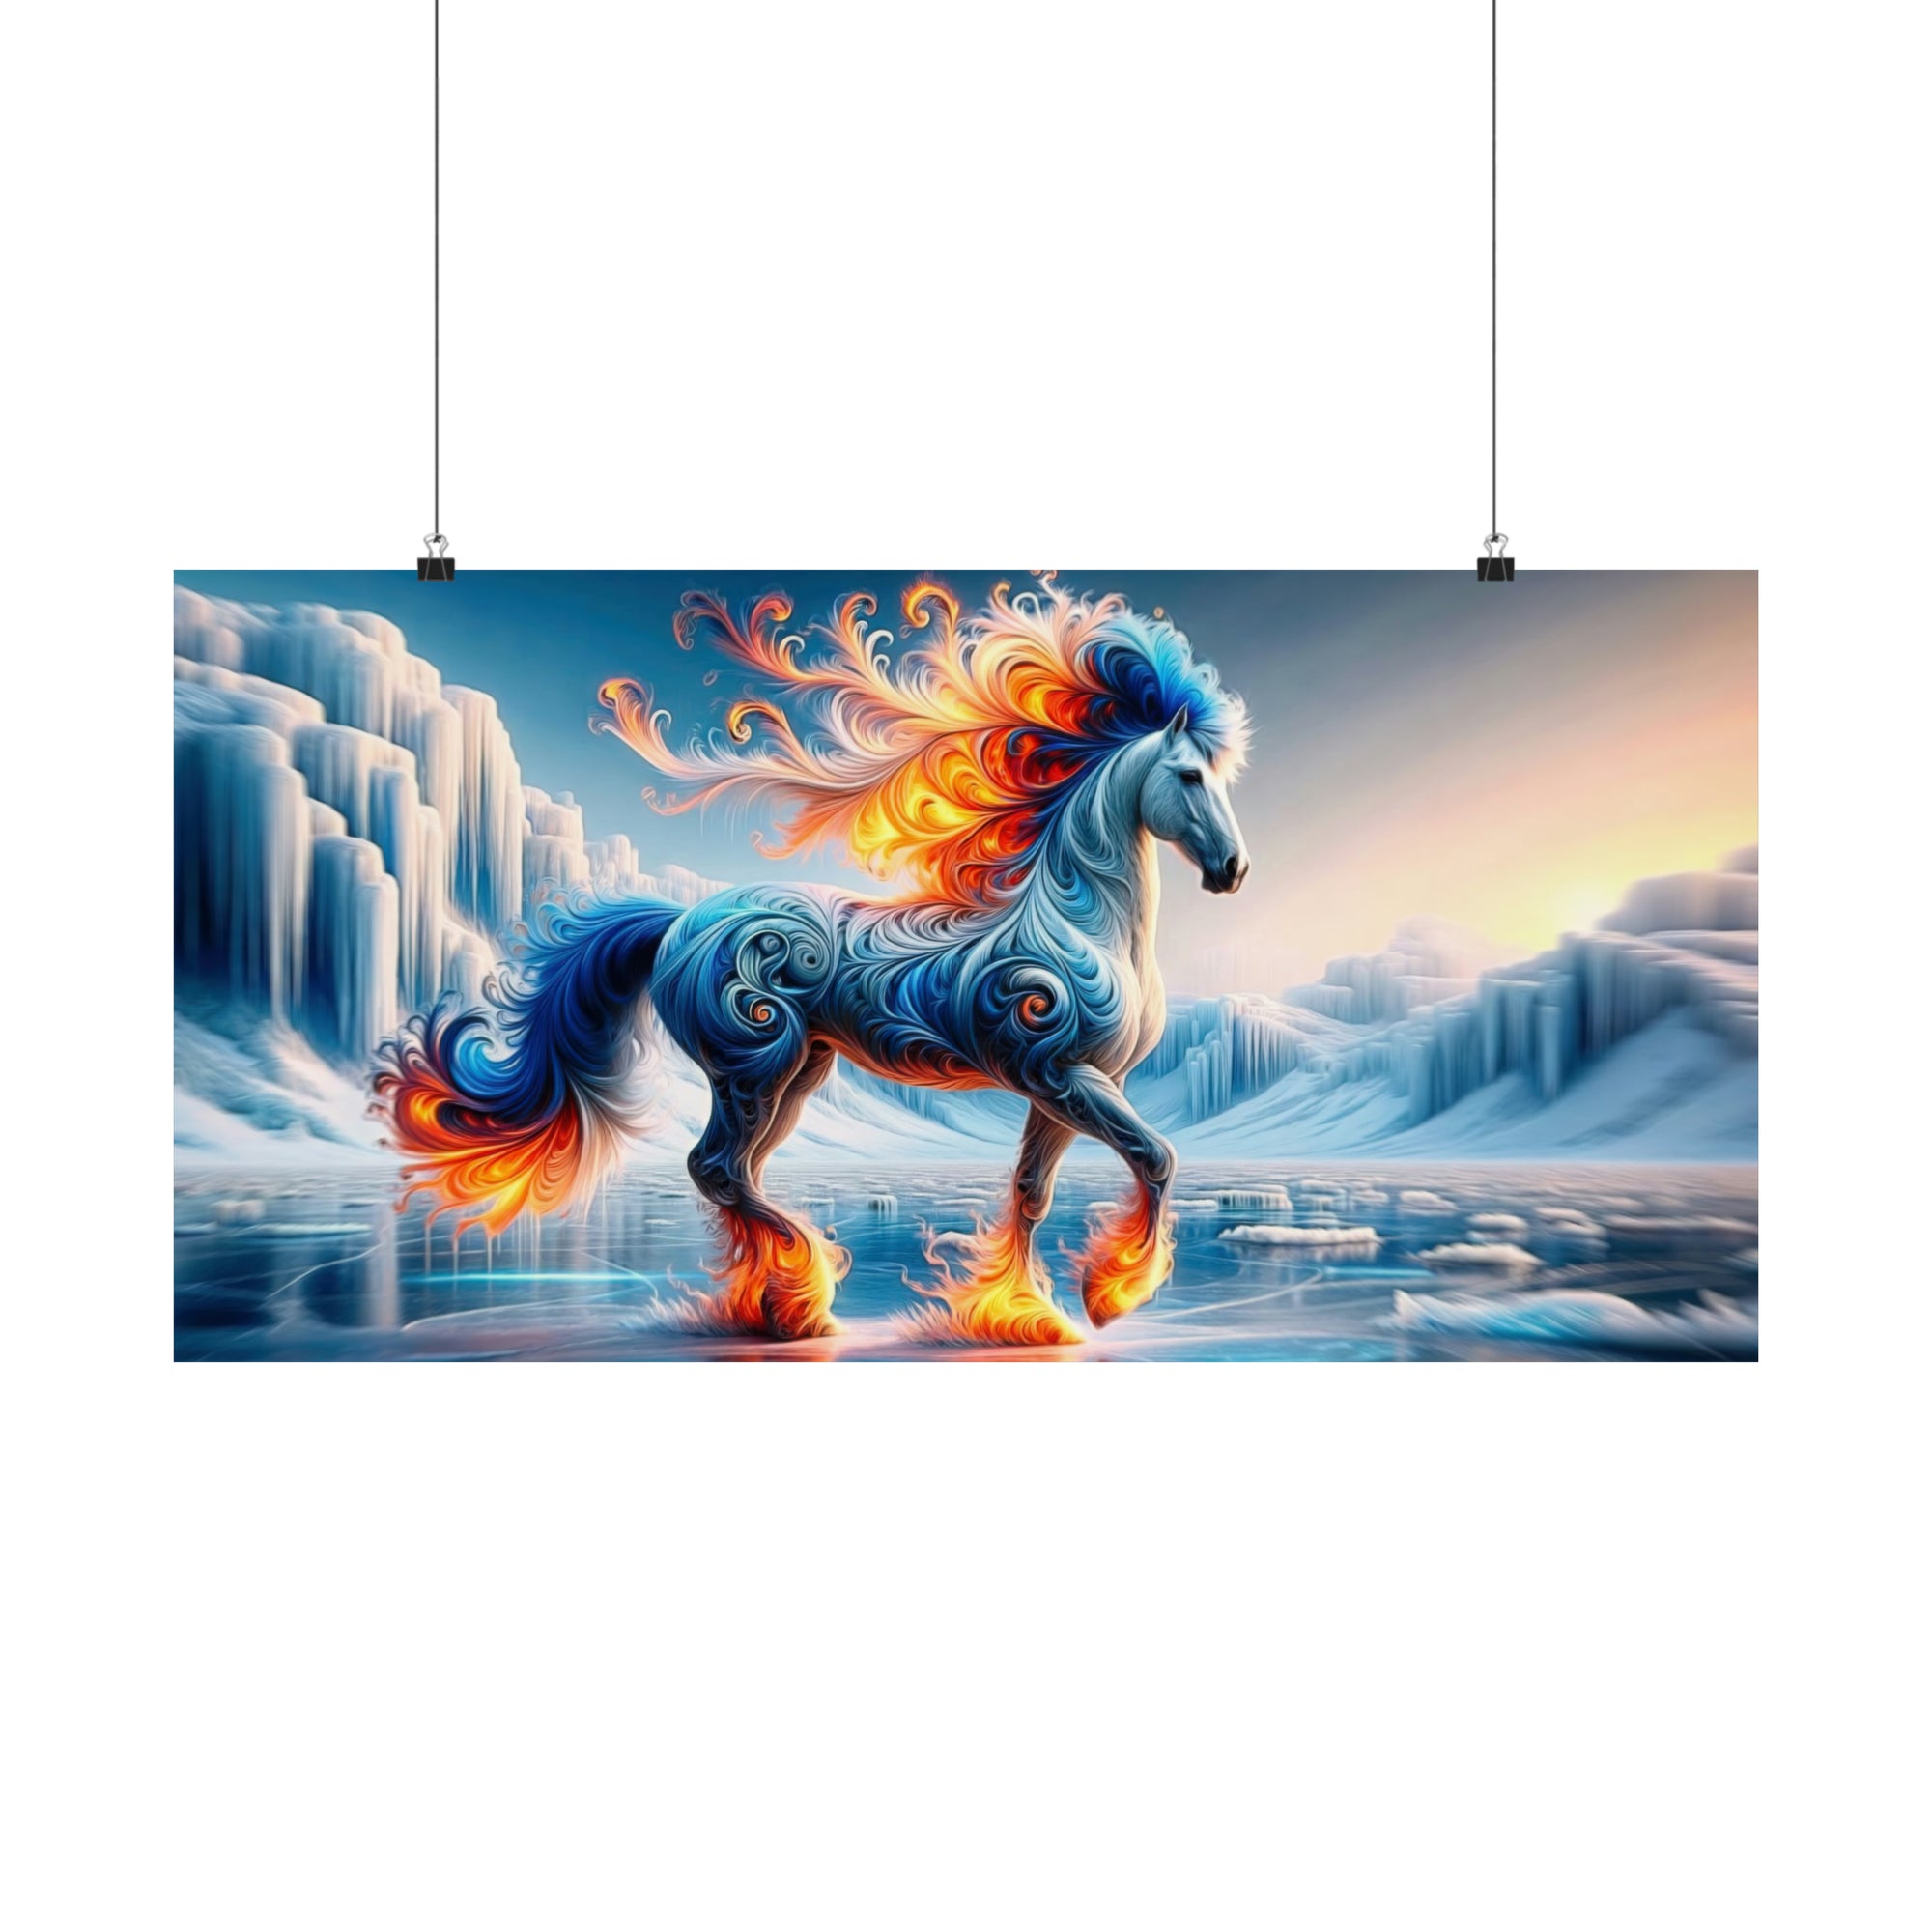 Ablaze Amongst the Glacial Spires Poster